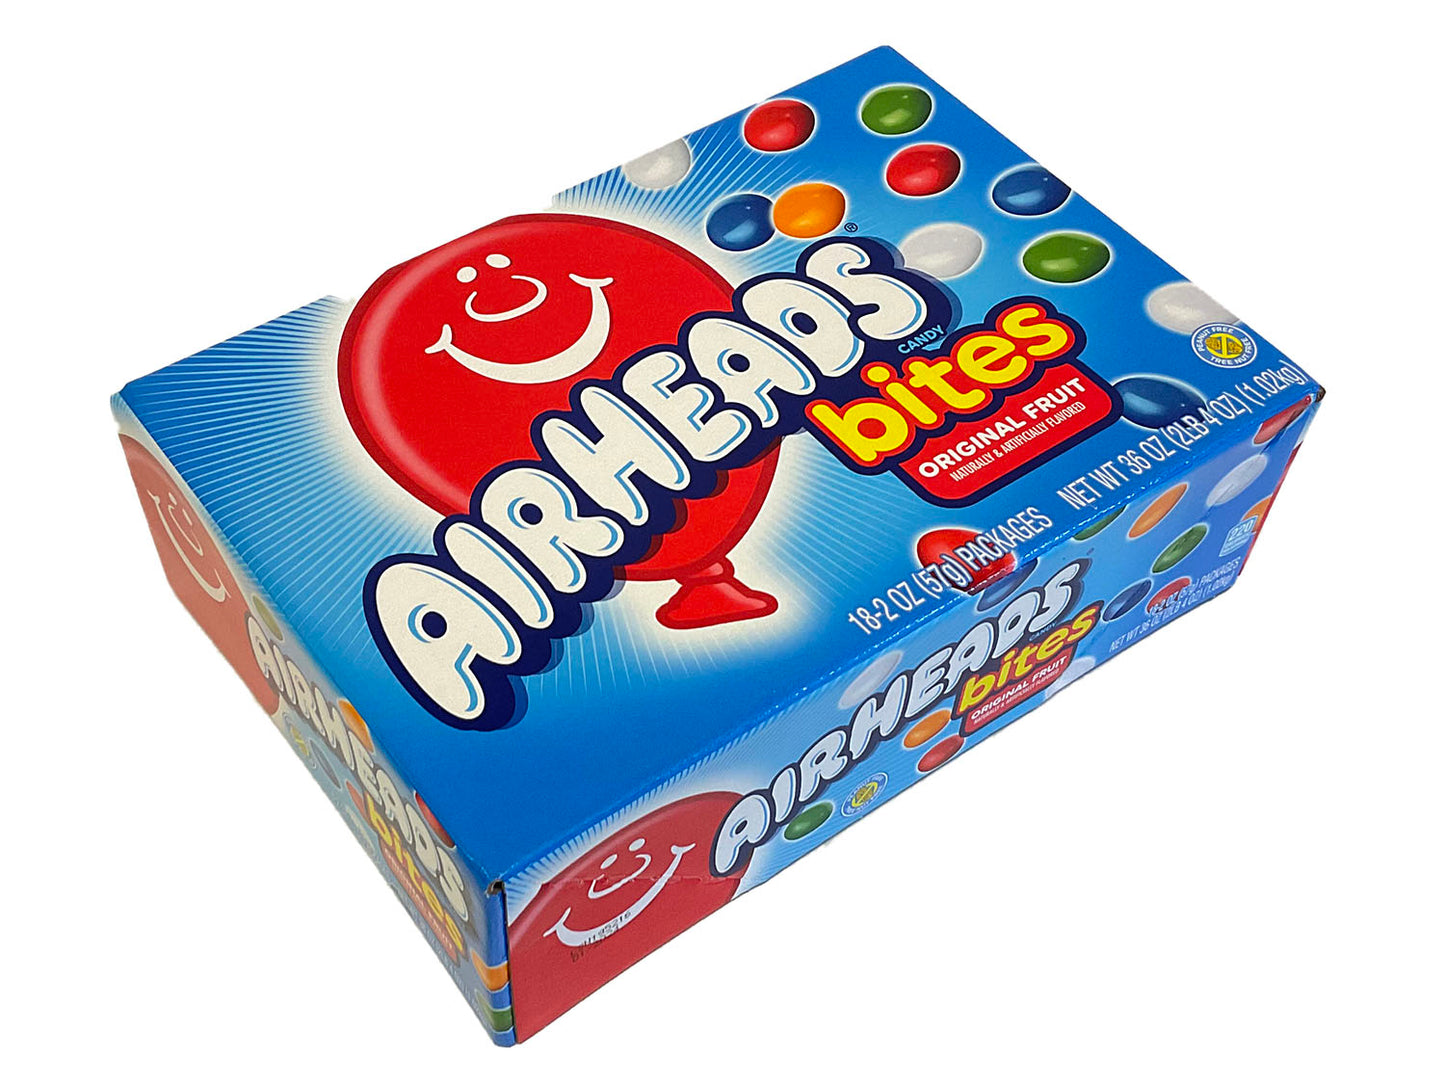 Airheads Bites Assorted Flavors - 2 oz pack - box of 18